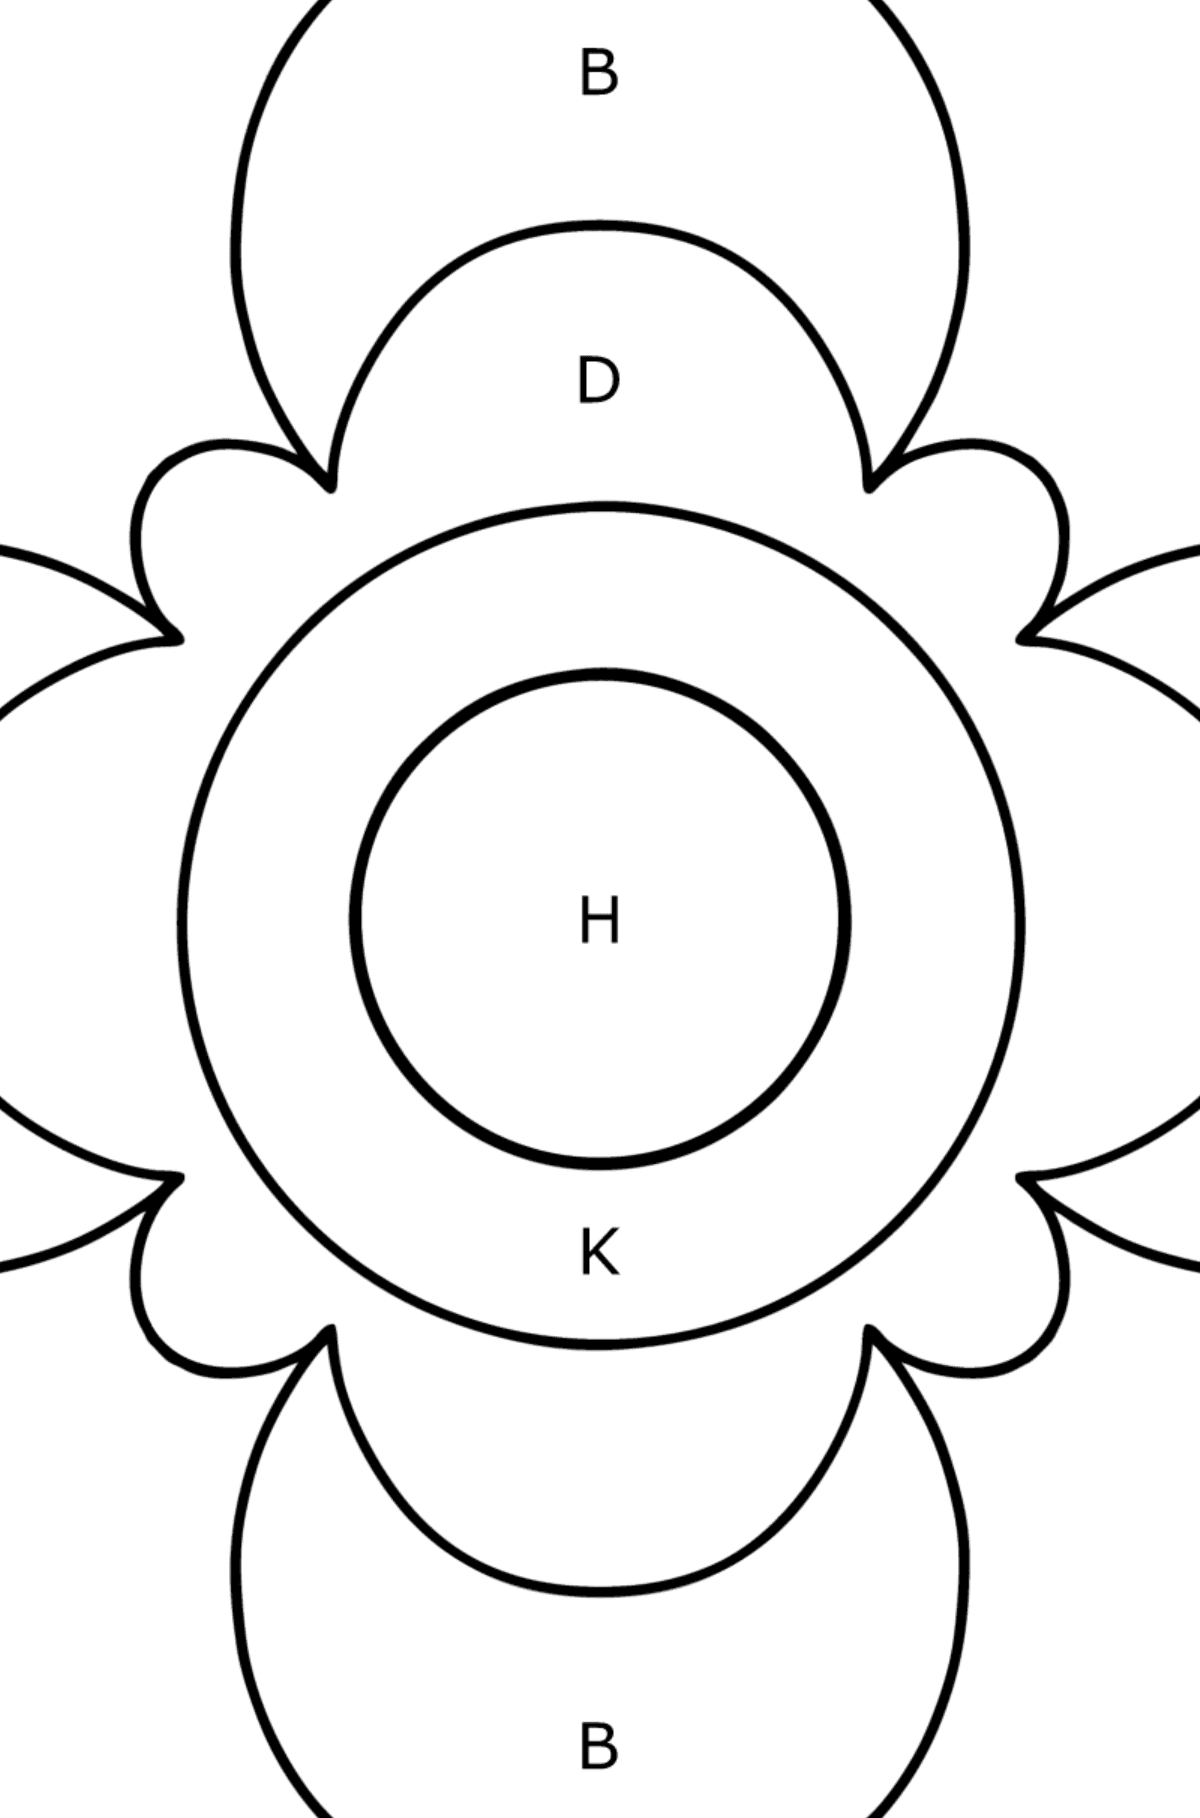 Coloring Anti stress flower for kids - Coloring by Letters for Kids